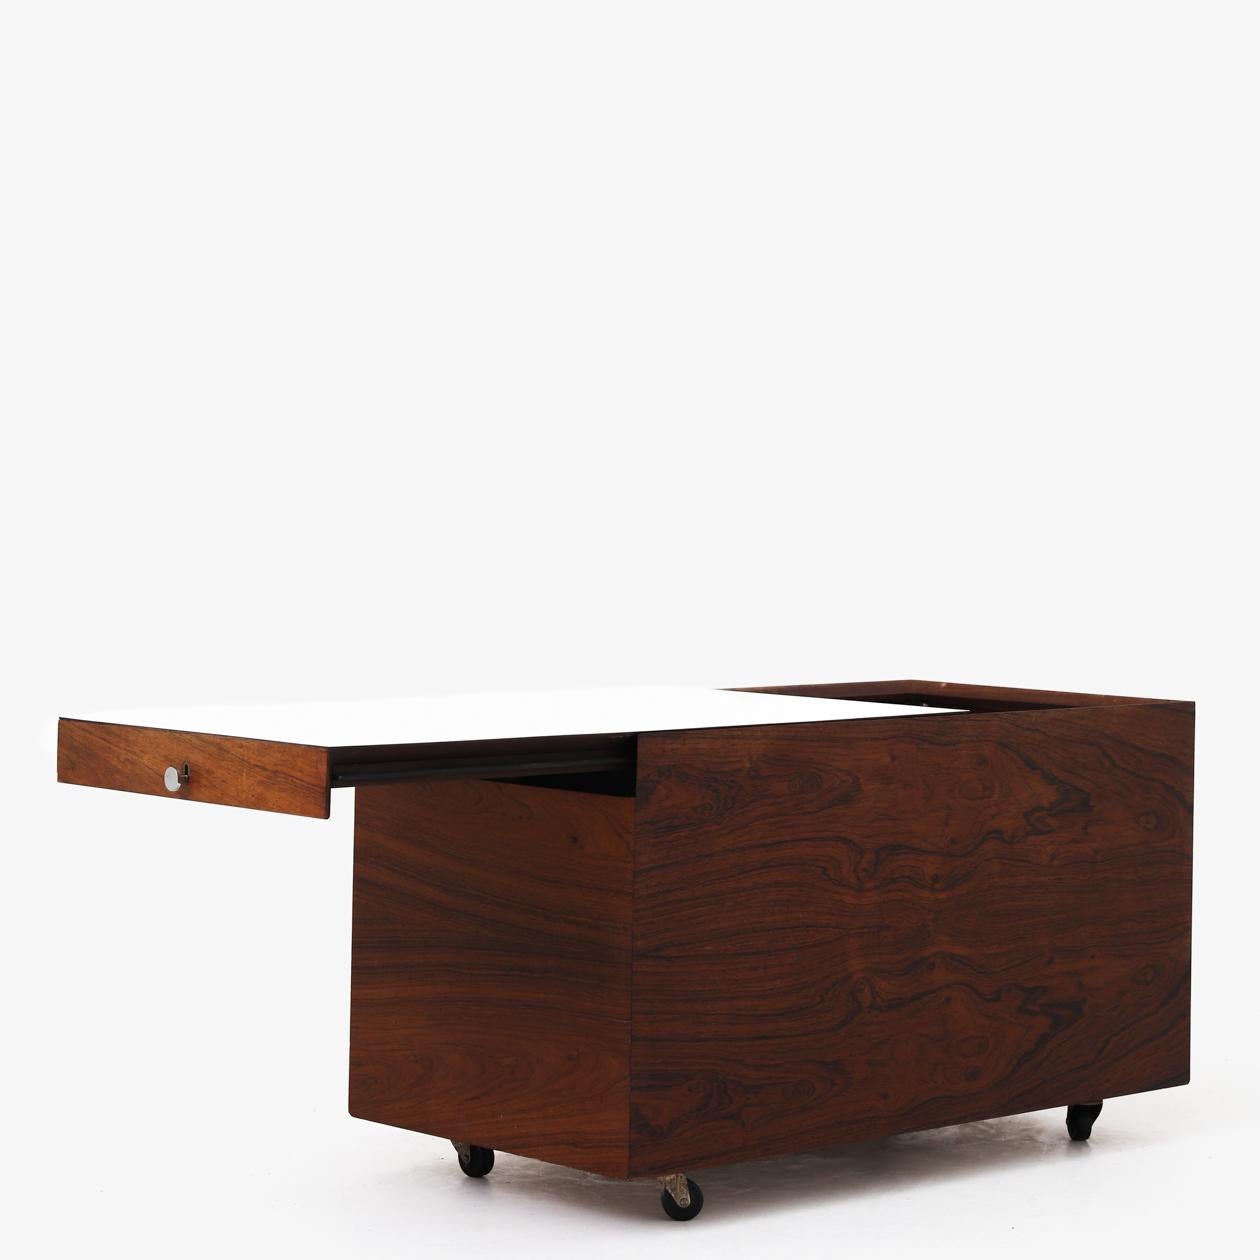 Brazilian rosewood bar with white Formica top from the 1960s. Poul Nørreklit / George Petersens Møbelfabrik.